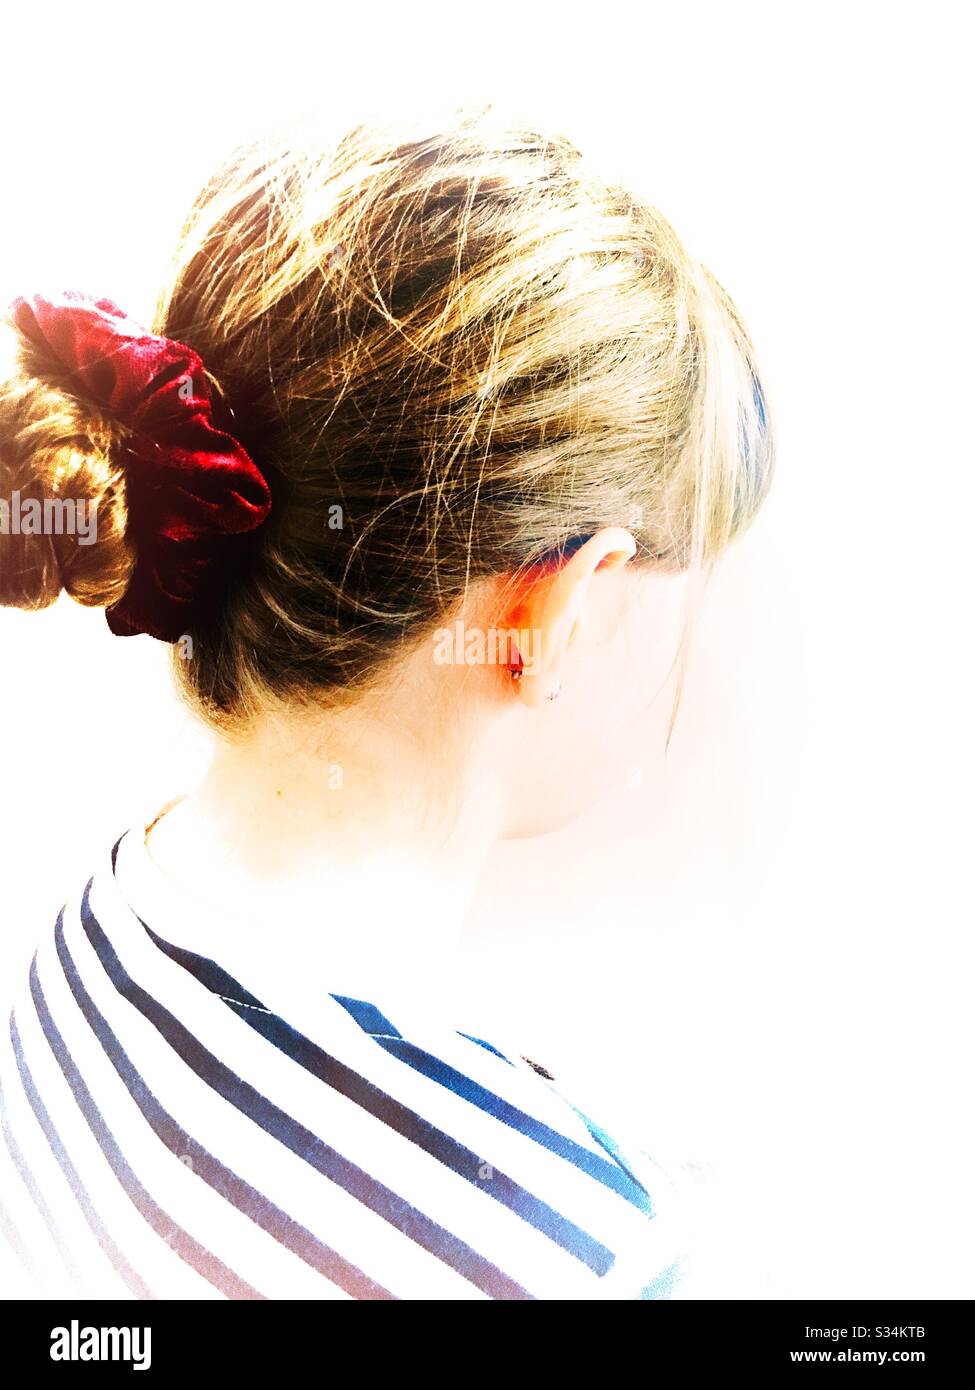 Rear view of girl with hair up Stock Photo